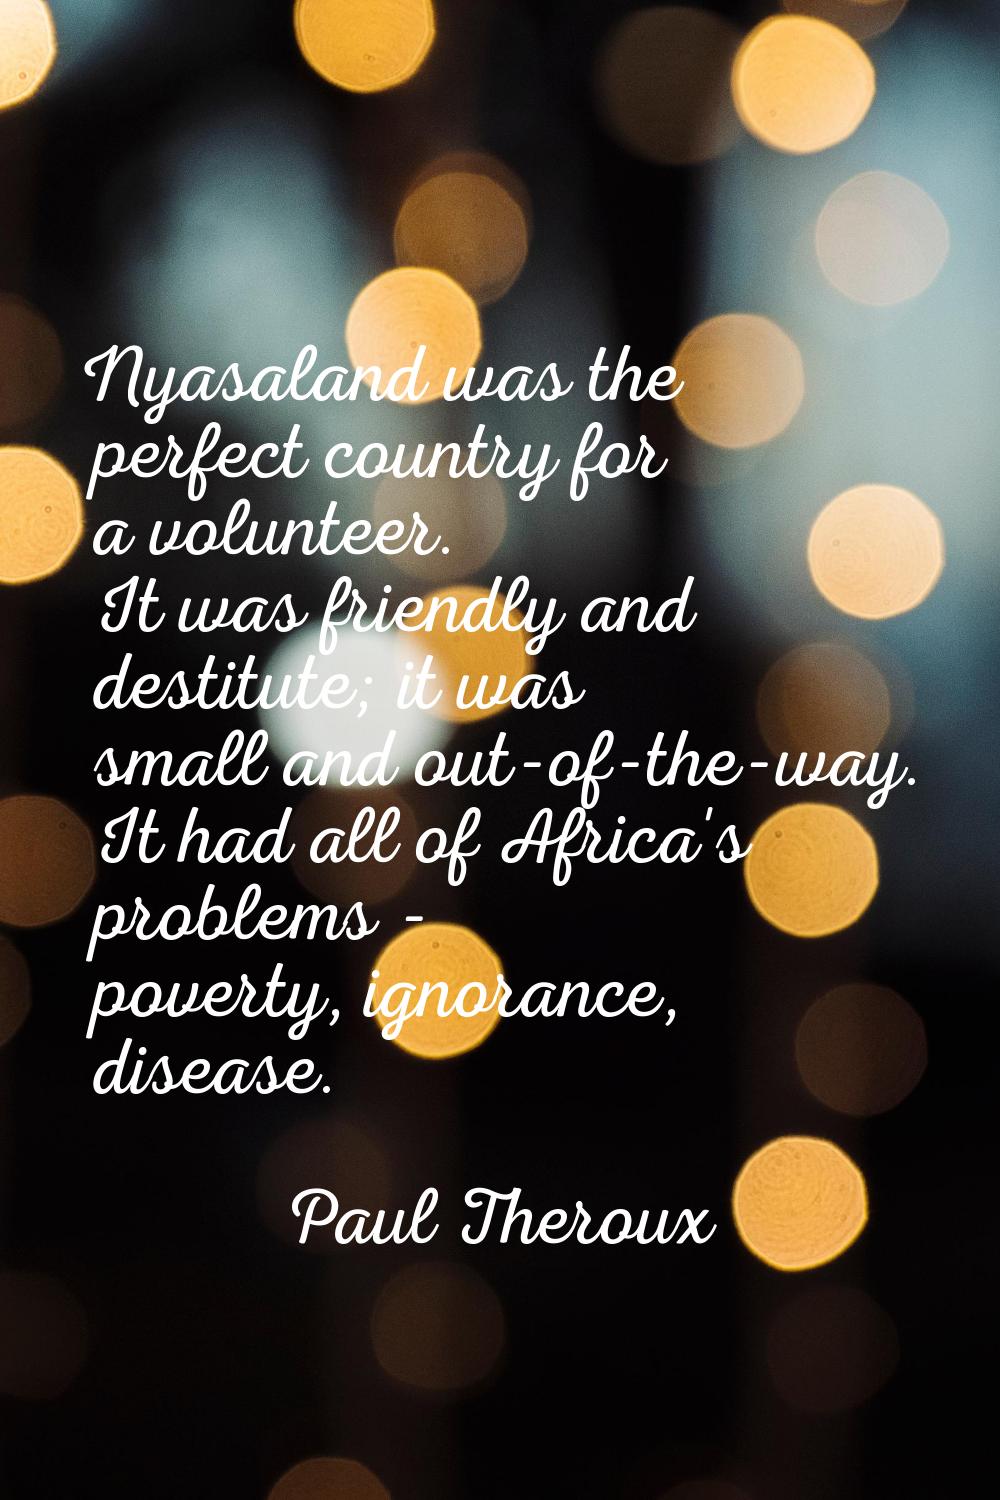 Nyasaland was the perfect country for a volunteer. It was friendly and destitute; it was small and 